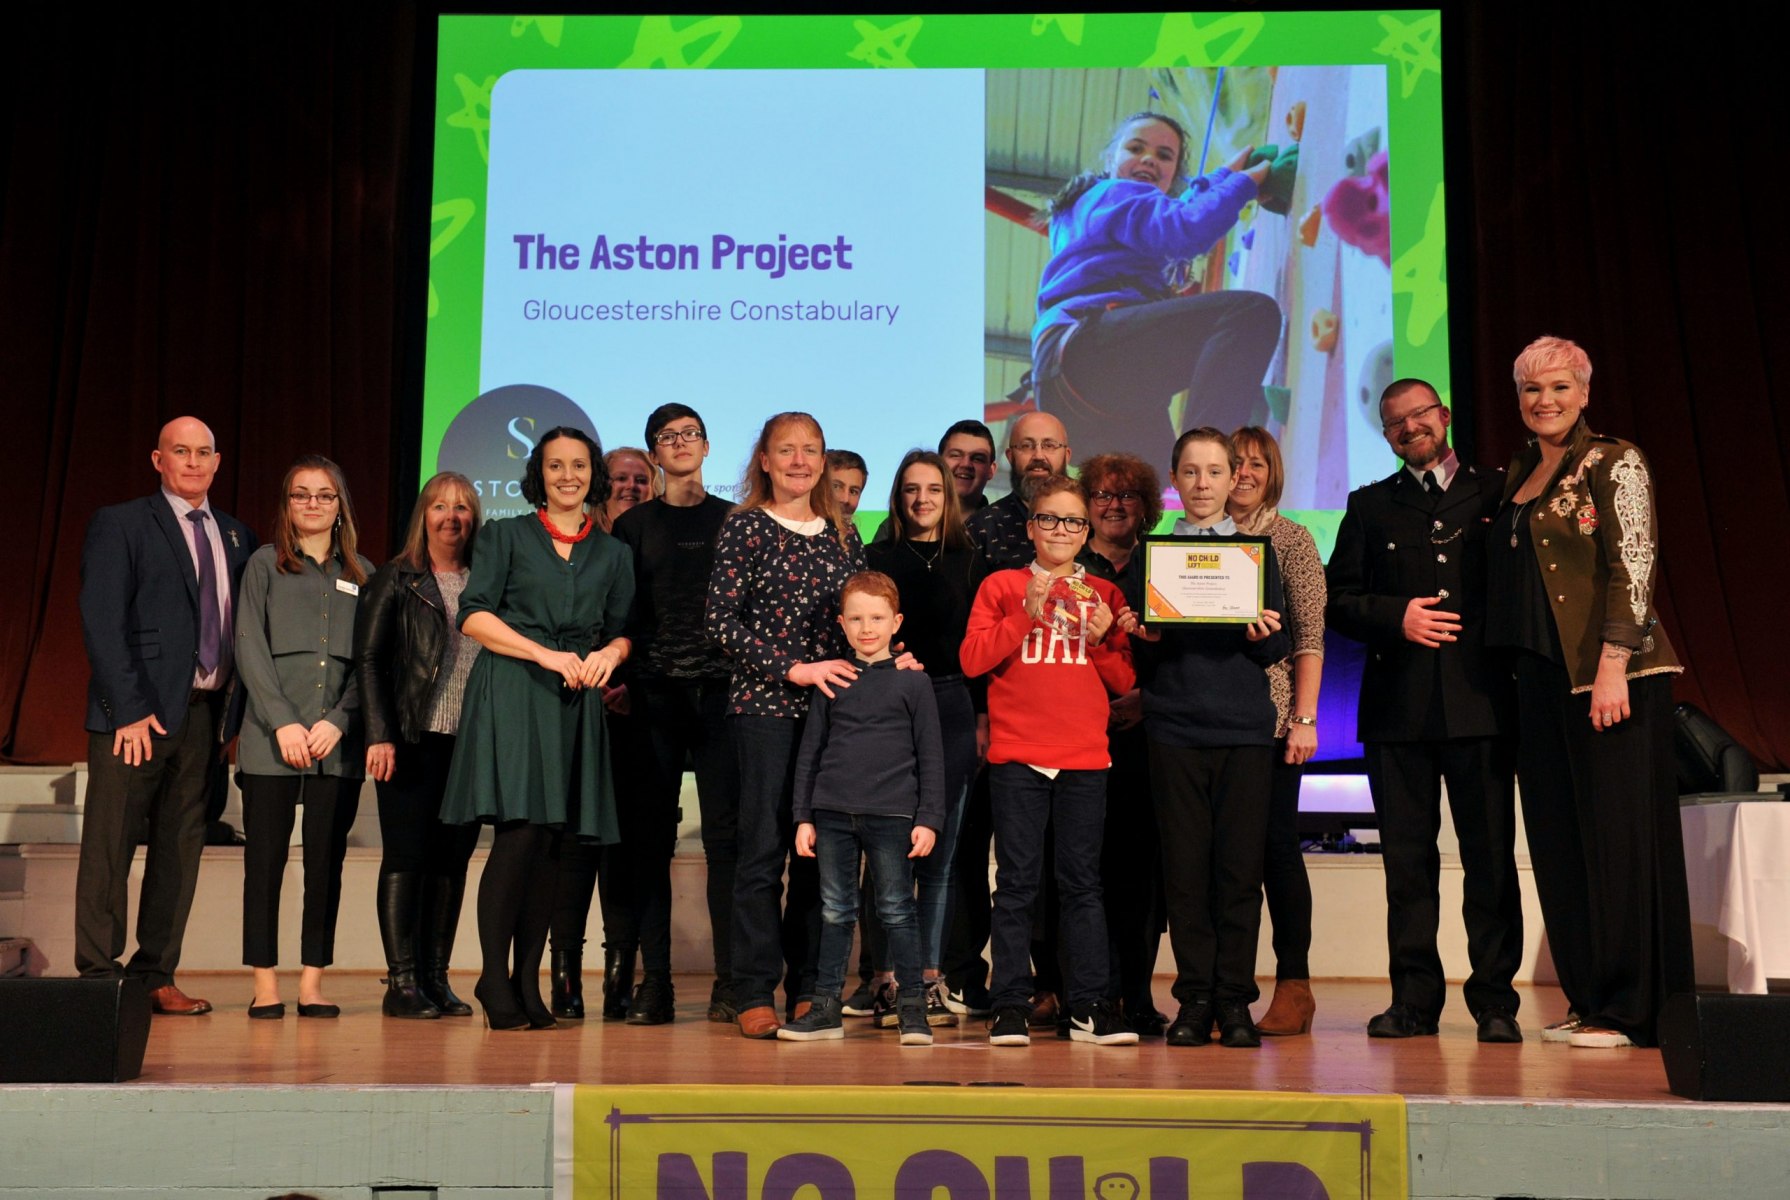 No Child Left Behind awards ceremony at Cheltenham Town Hall. Positive Relationships Award presented by Louise Chipchase (Stowe Family Law) to The Aston Project